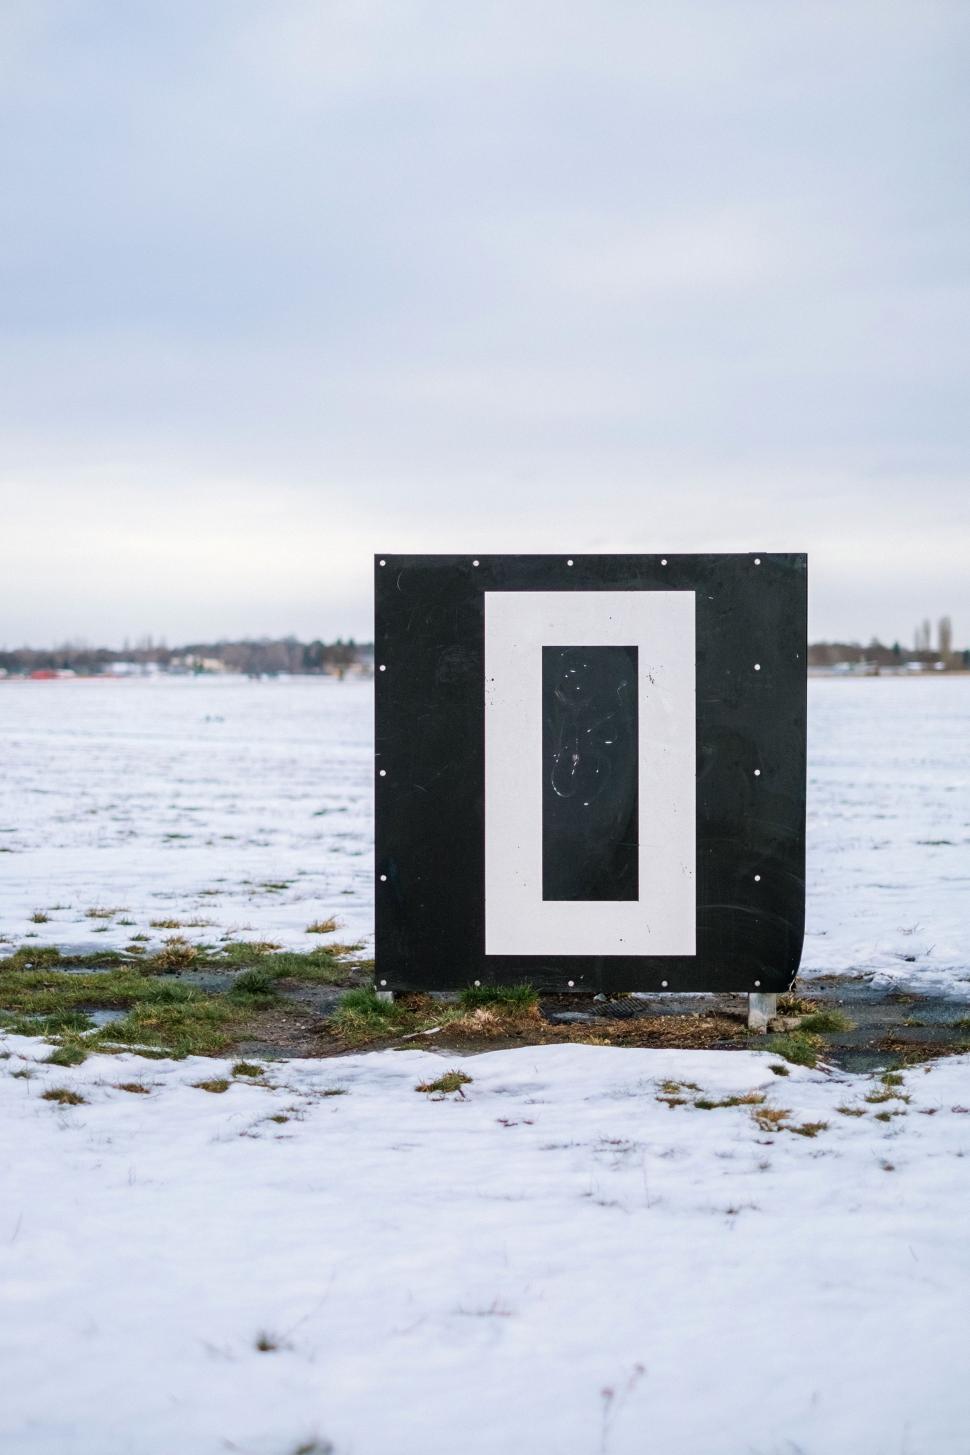 Free Image of Black and White Box in Snow Covered Field 